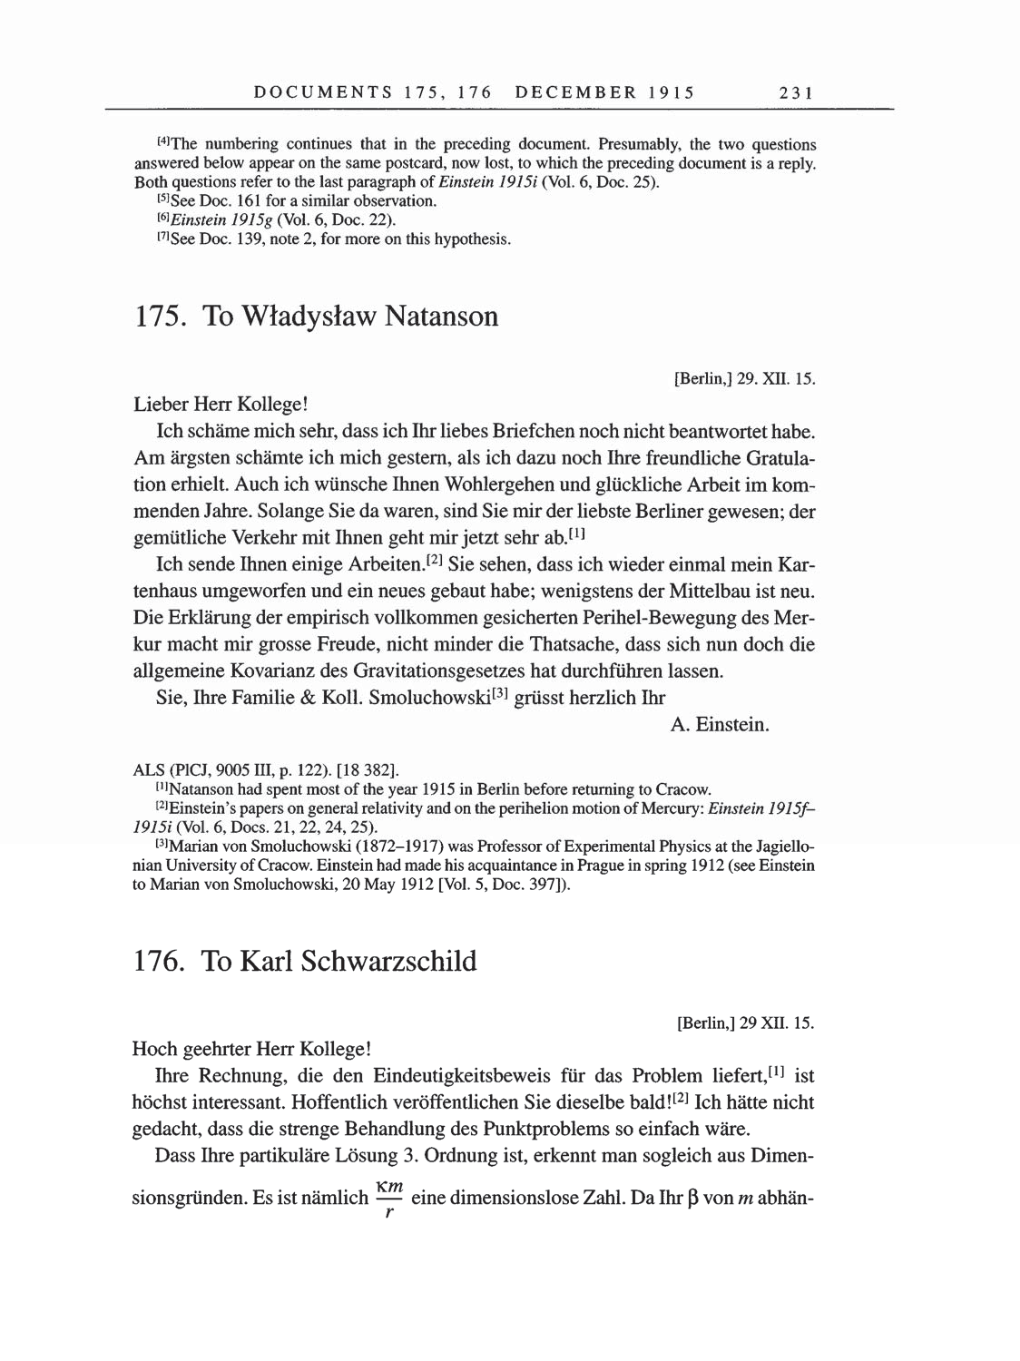 Volume 8, Part A: The Berlin Years: Correspondence 1914-1917 page 231